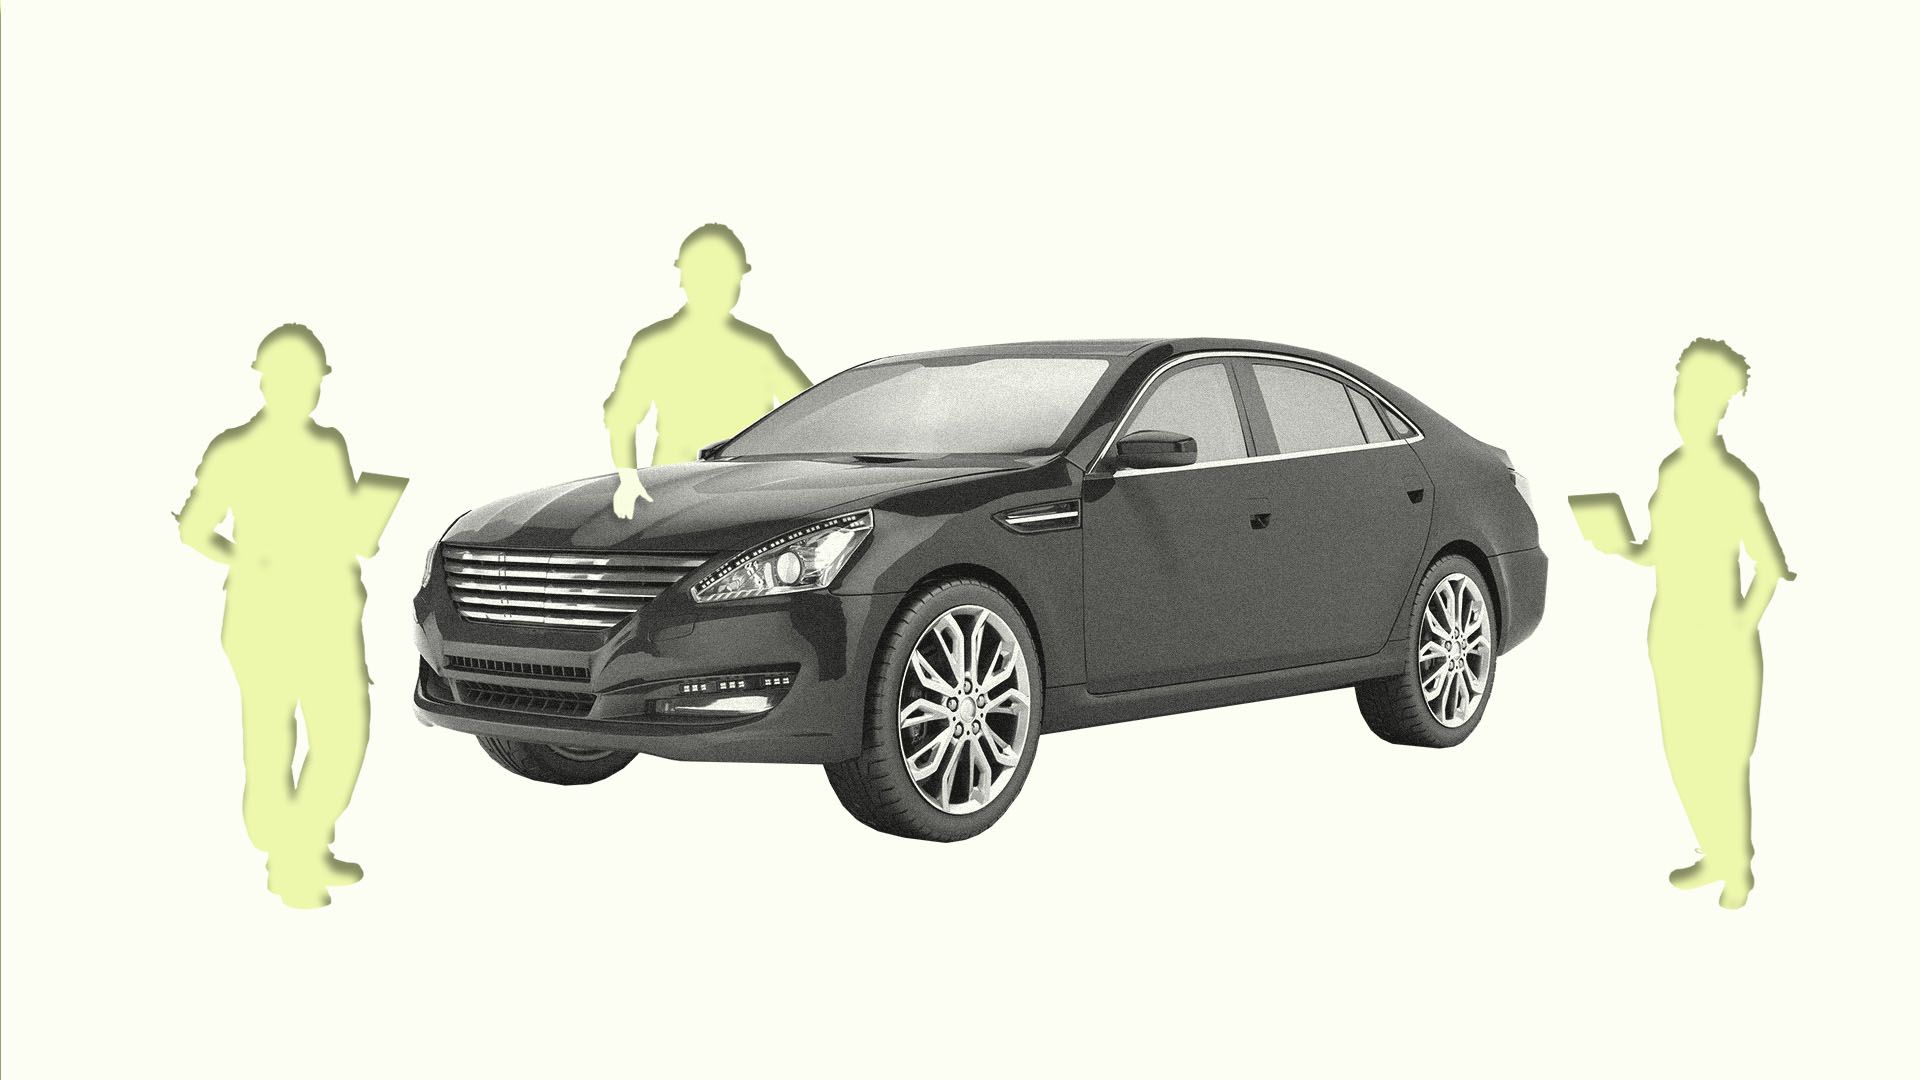 Illustration of experts missing around car